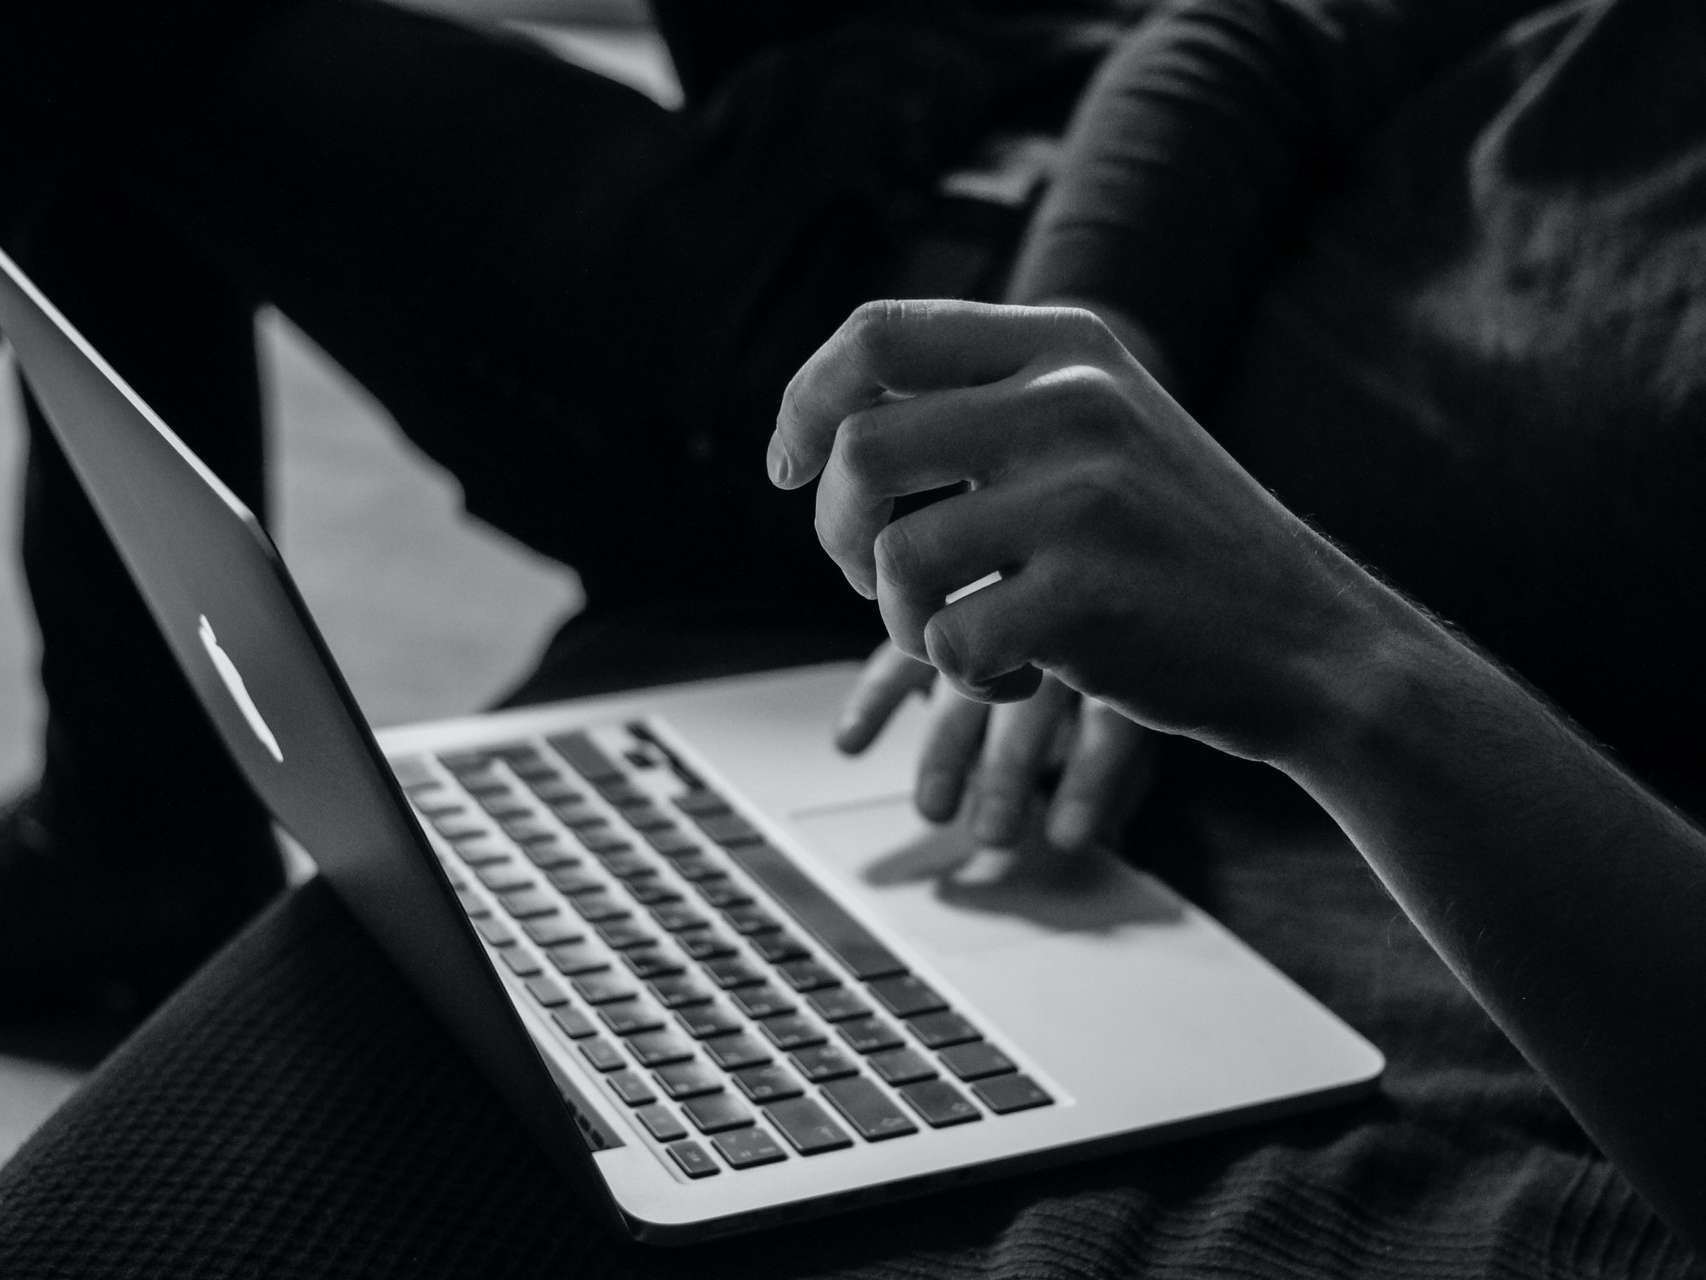 Black and white image of someone typing on a laptop